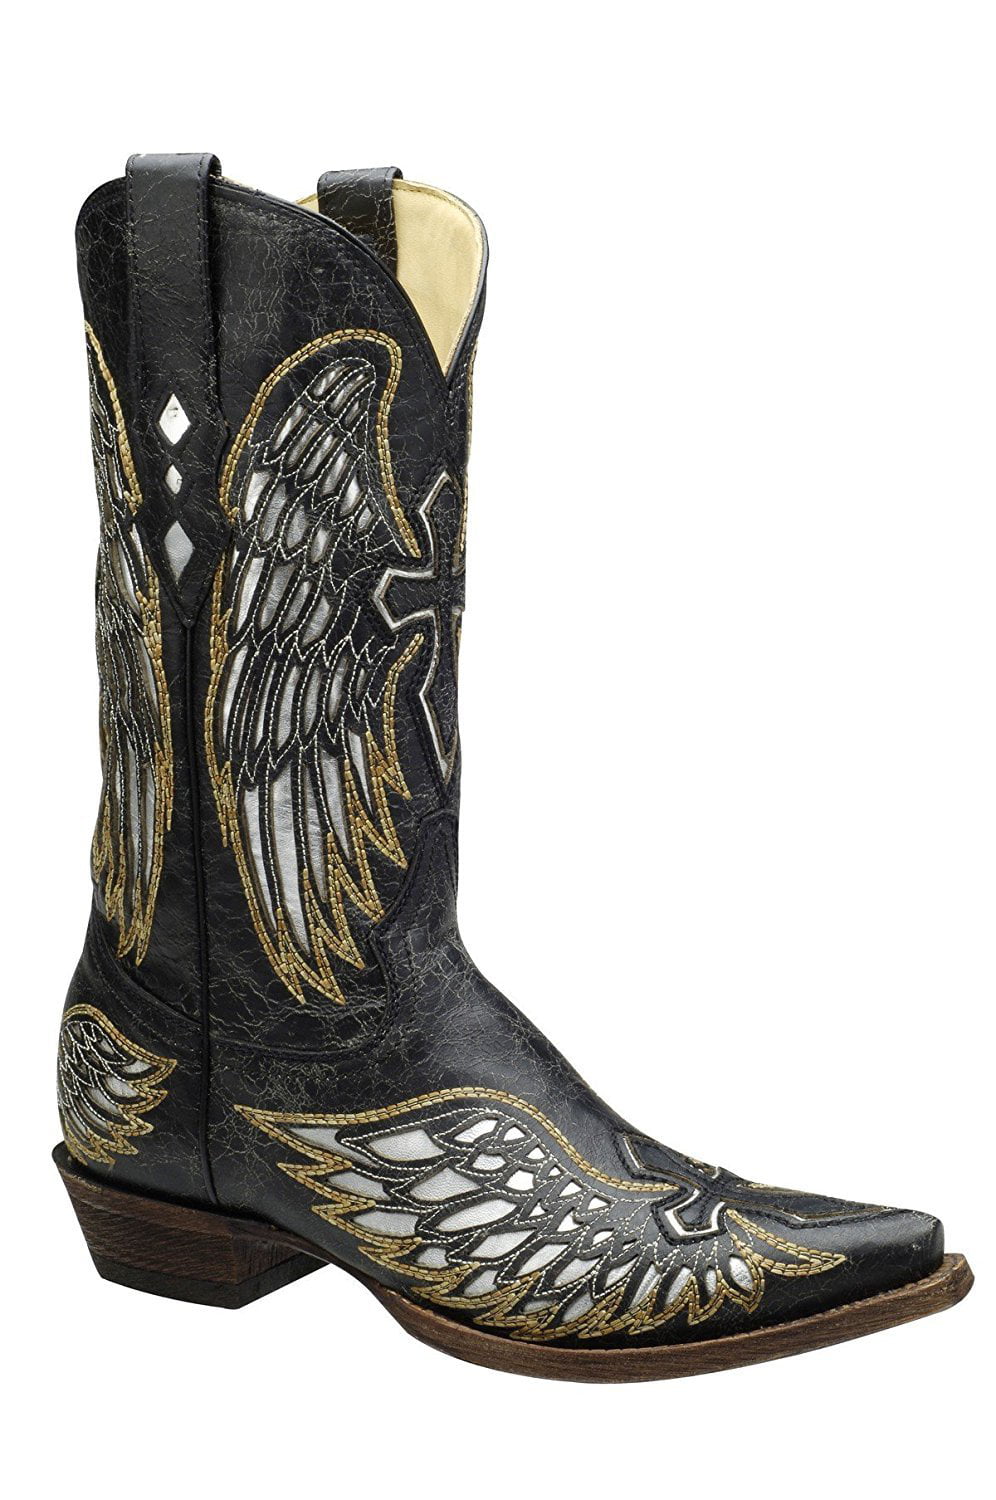 corral silver boots